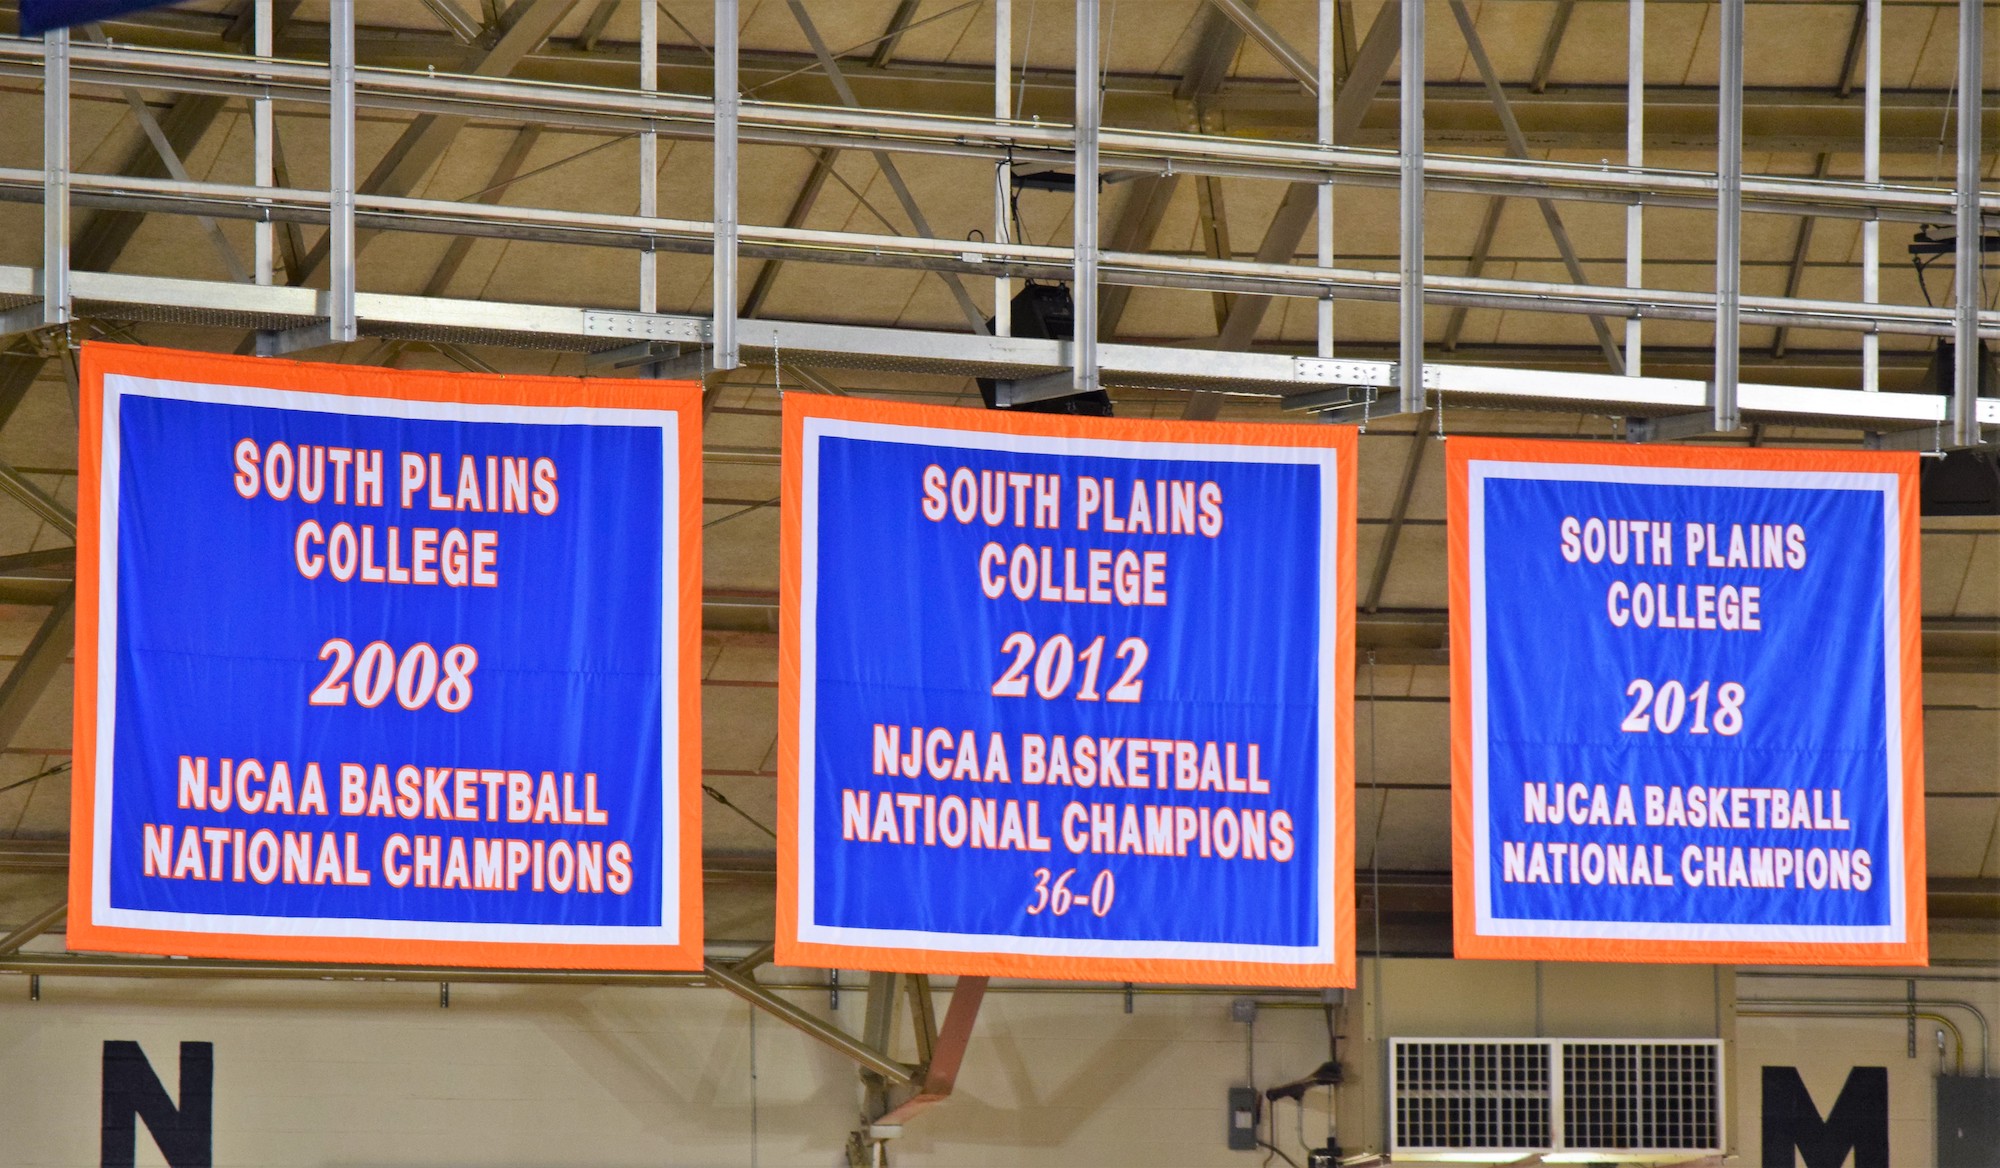 South Plains College 2008, 2012 and 2018 NJCAA Basketball Champions